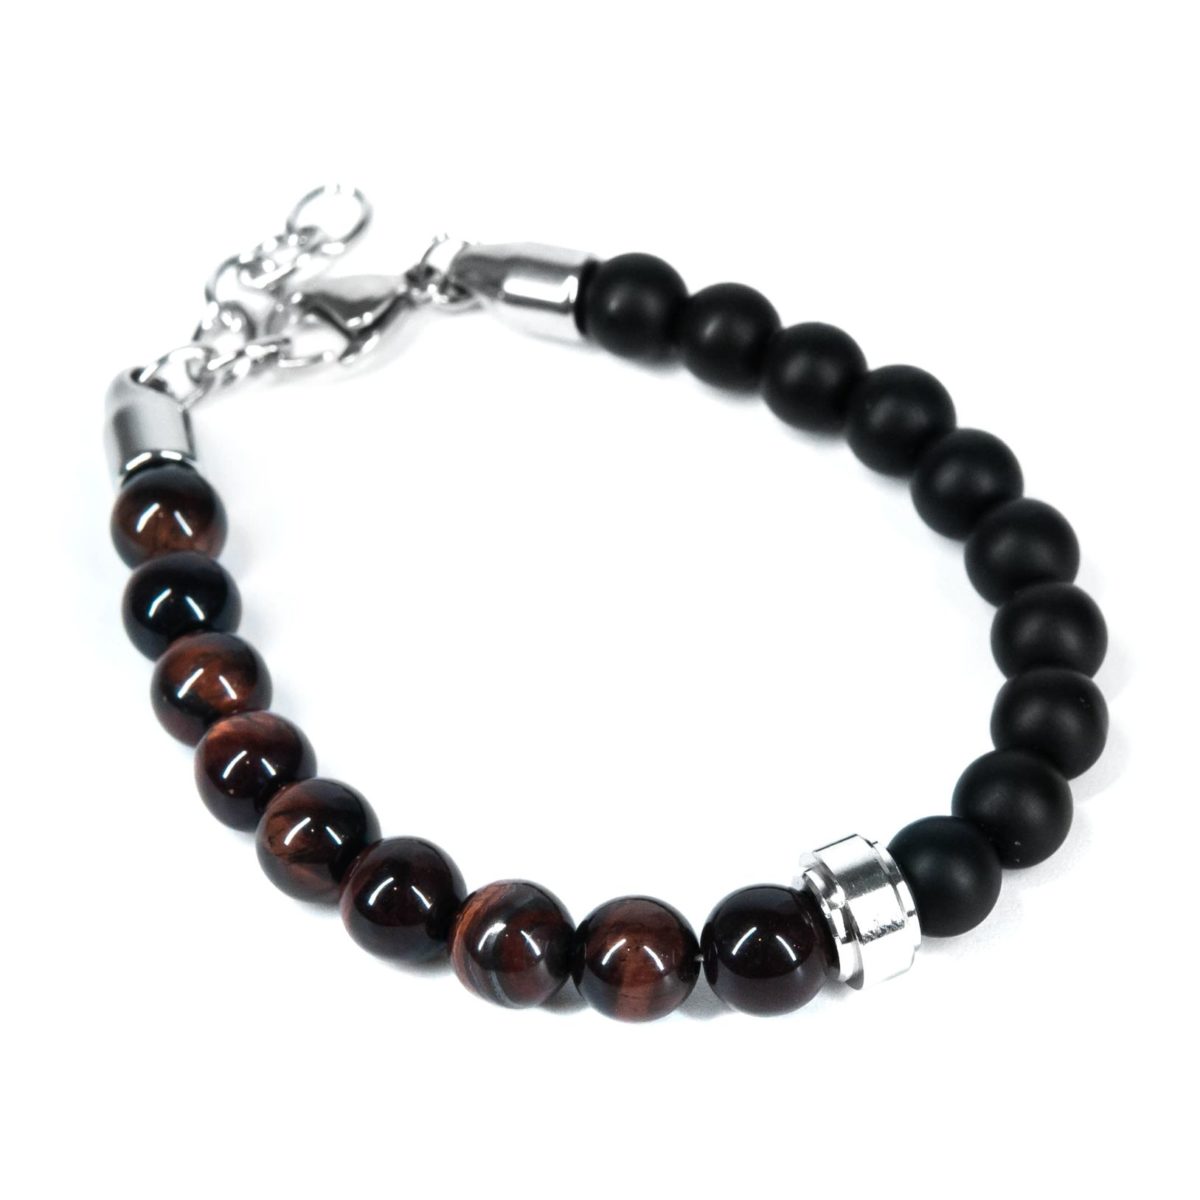 https://m.clubbella.co/product/anson-tiger-eyes-bracelet/ Anson Tiger Eyes bracelet (4)